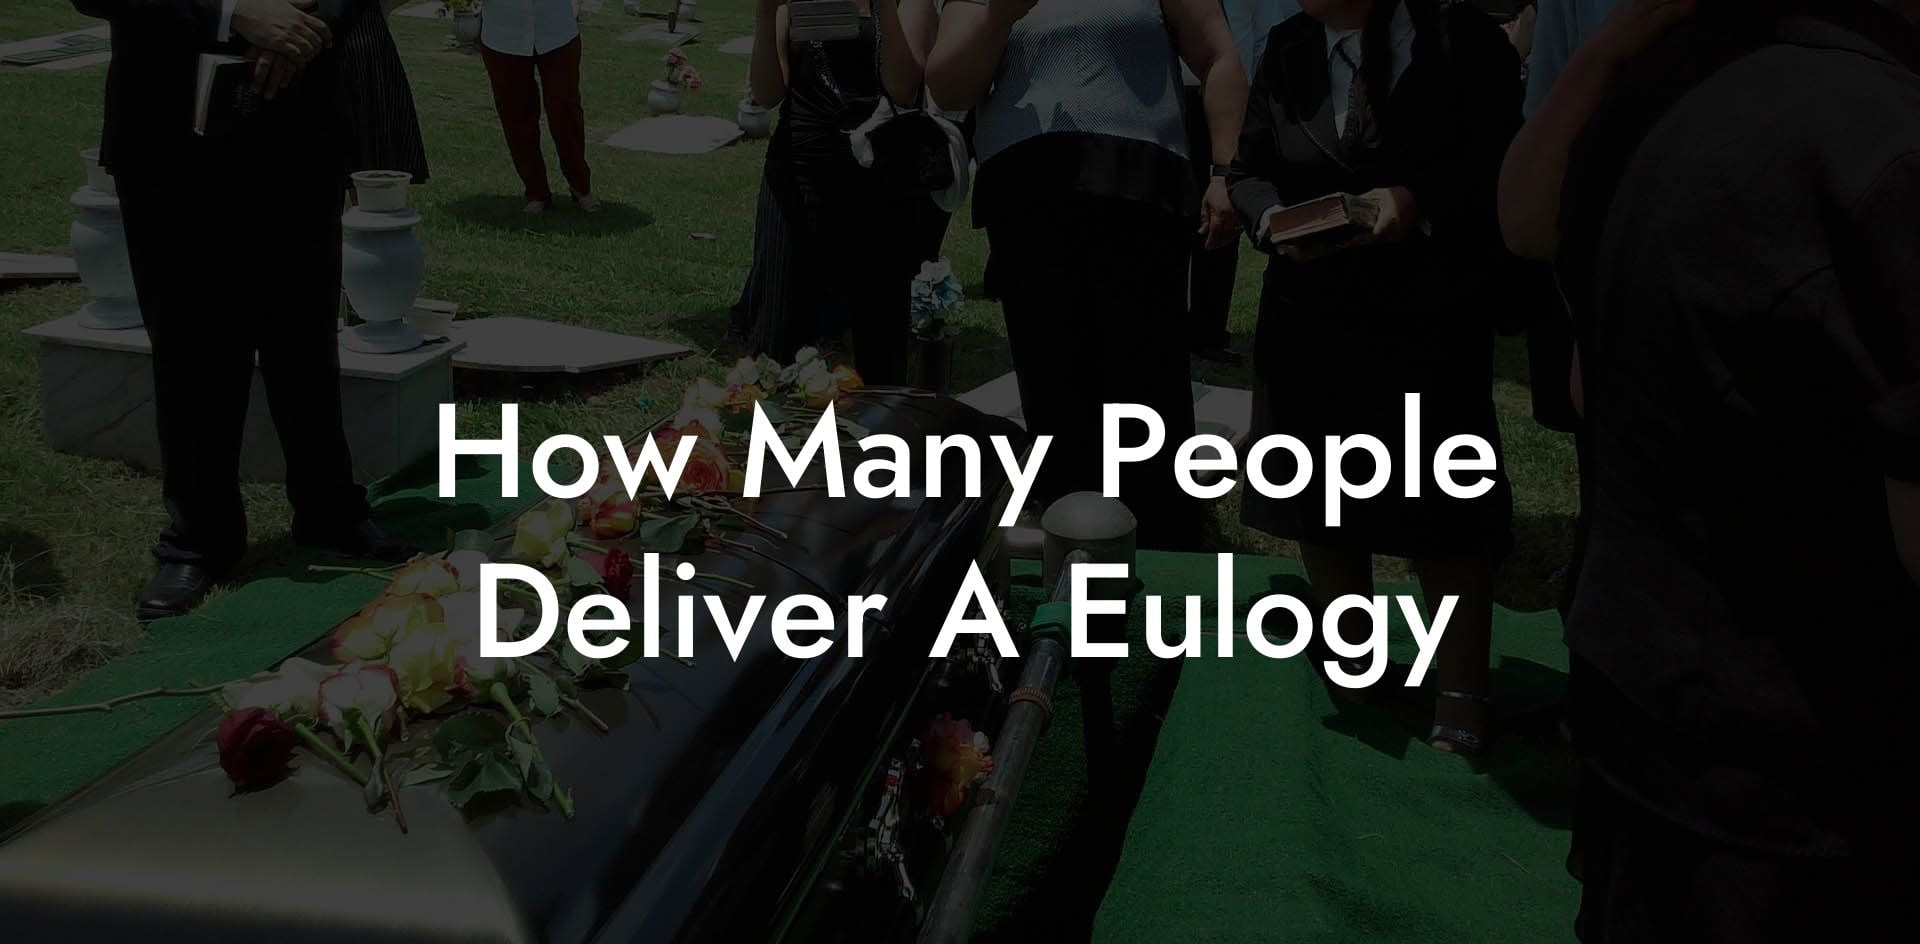 How Many People Deliver A Eulogy